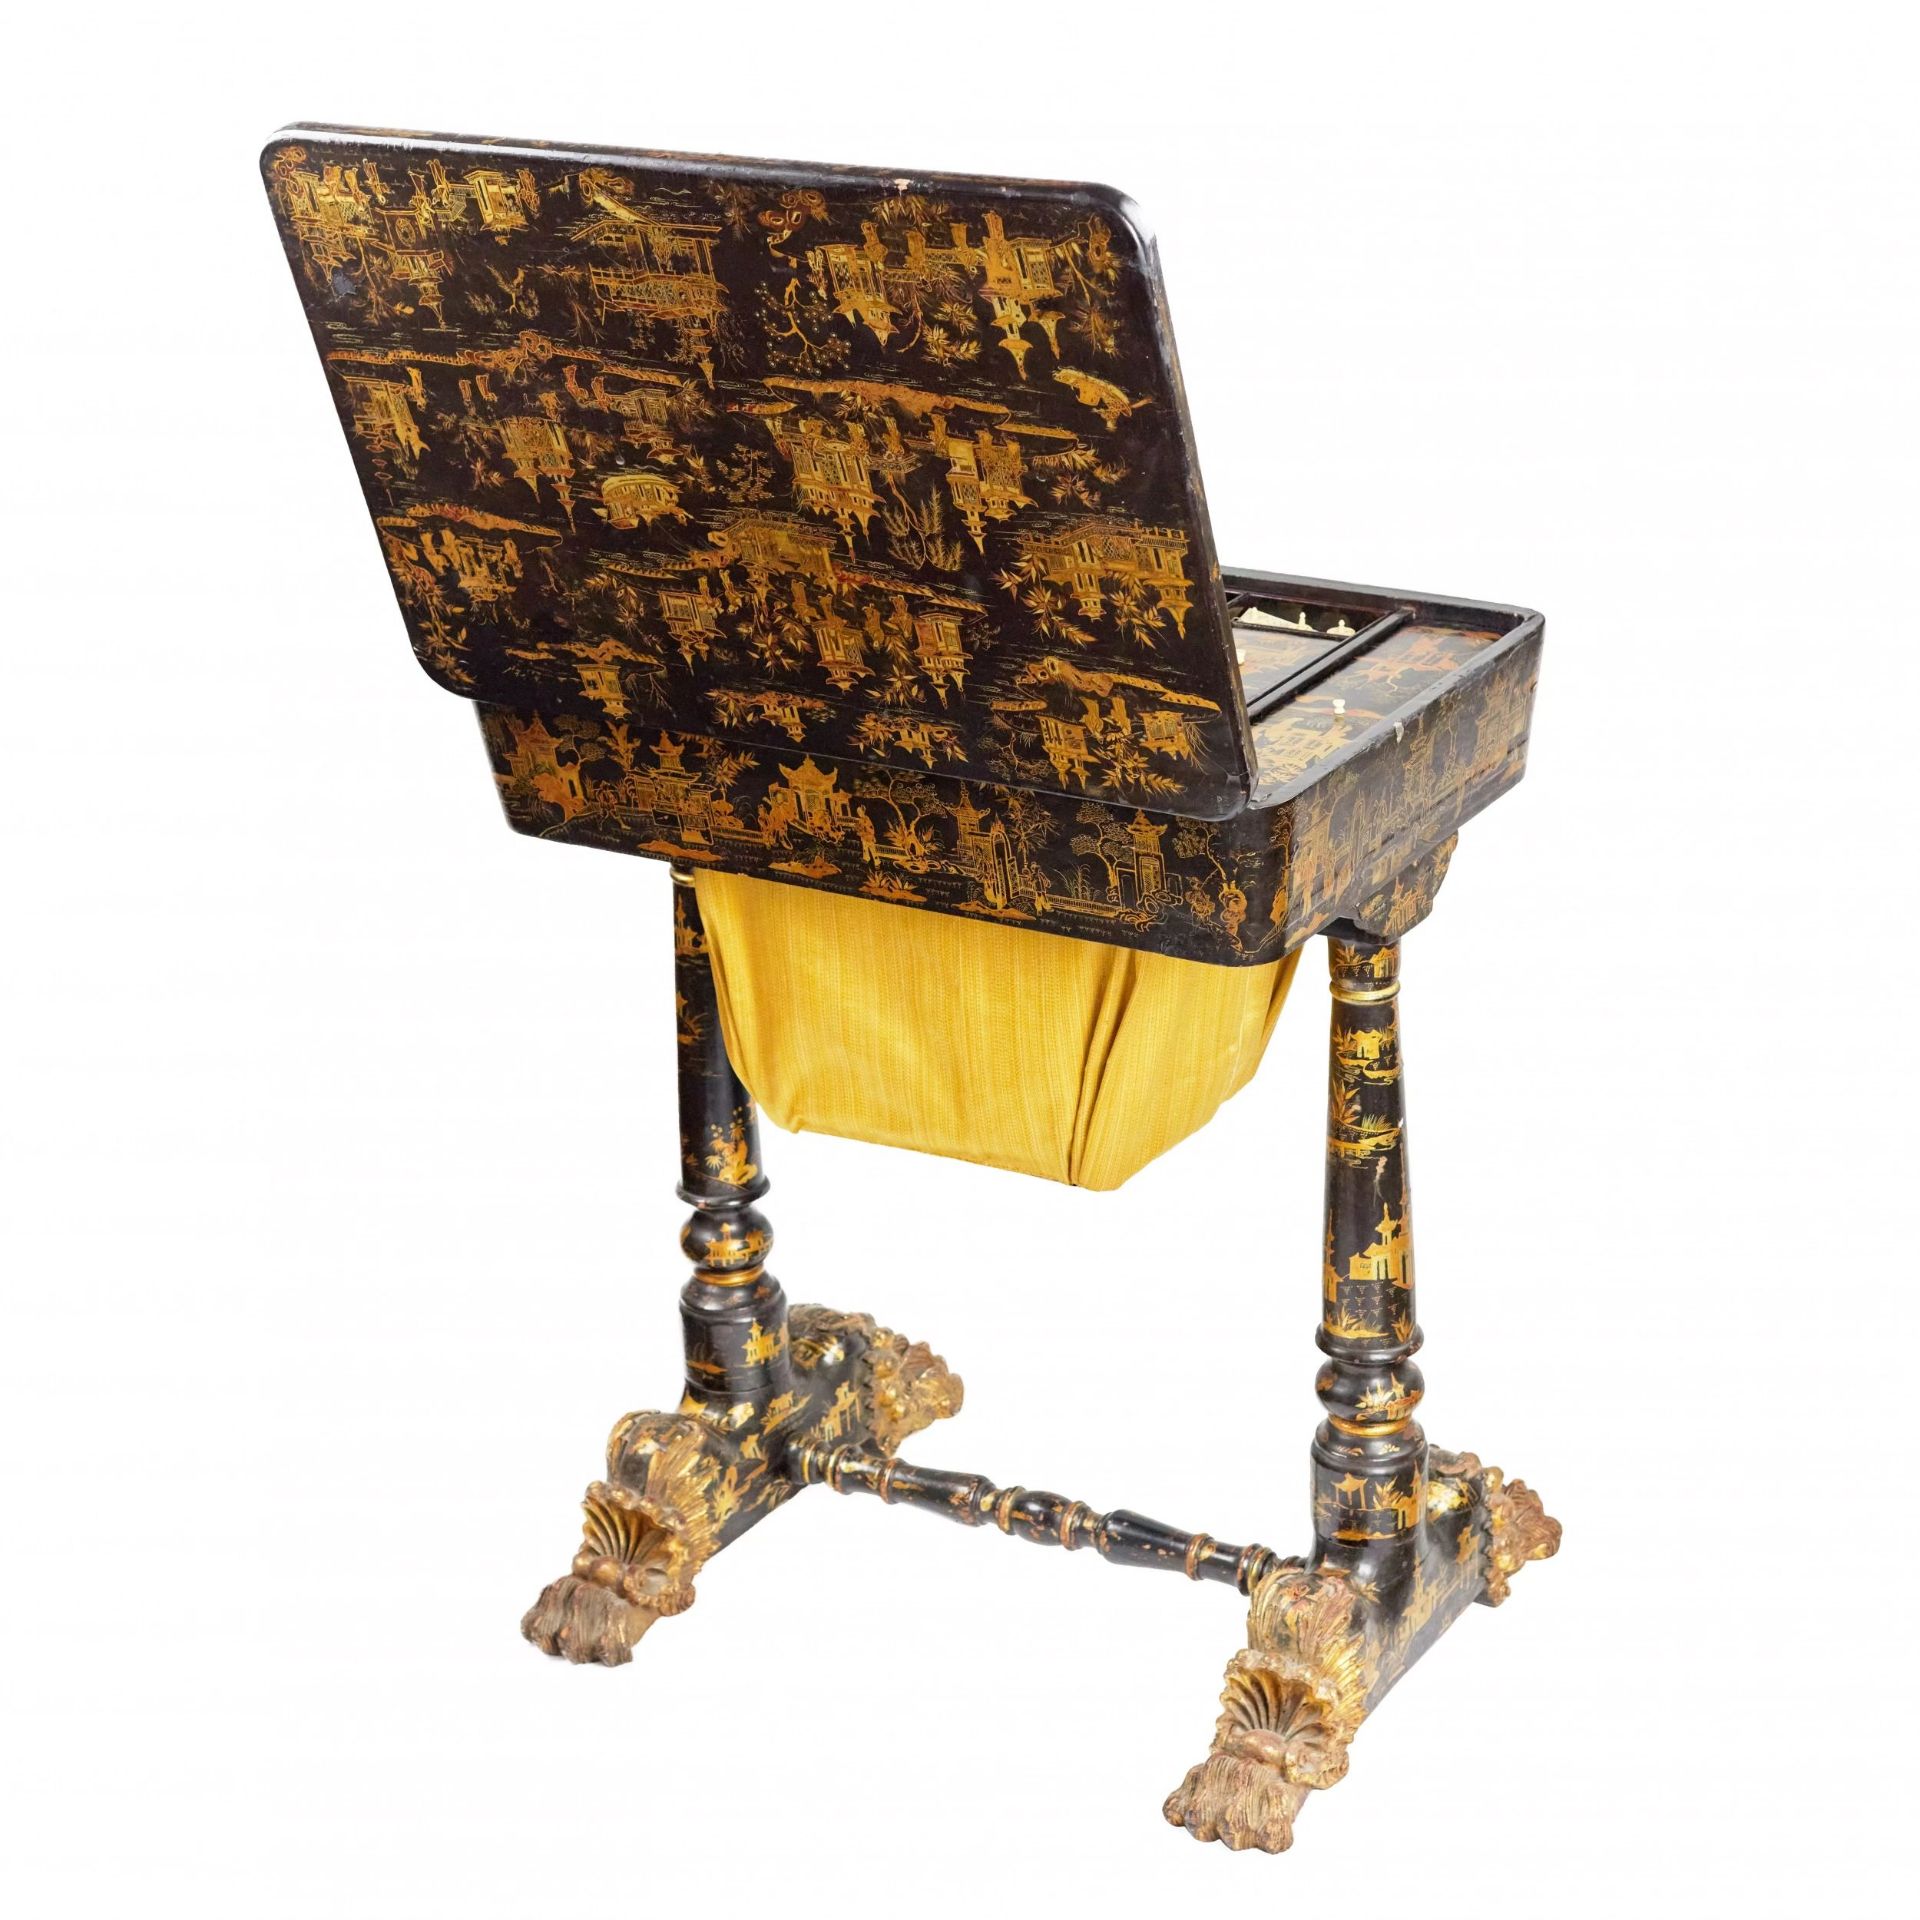 Needlework table made of black and gold Beijing lacquer. 19th century. - Bild 8 aus 11